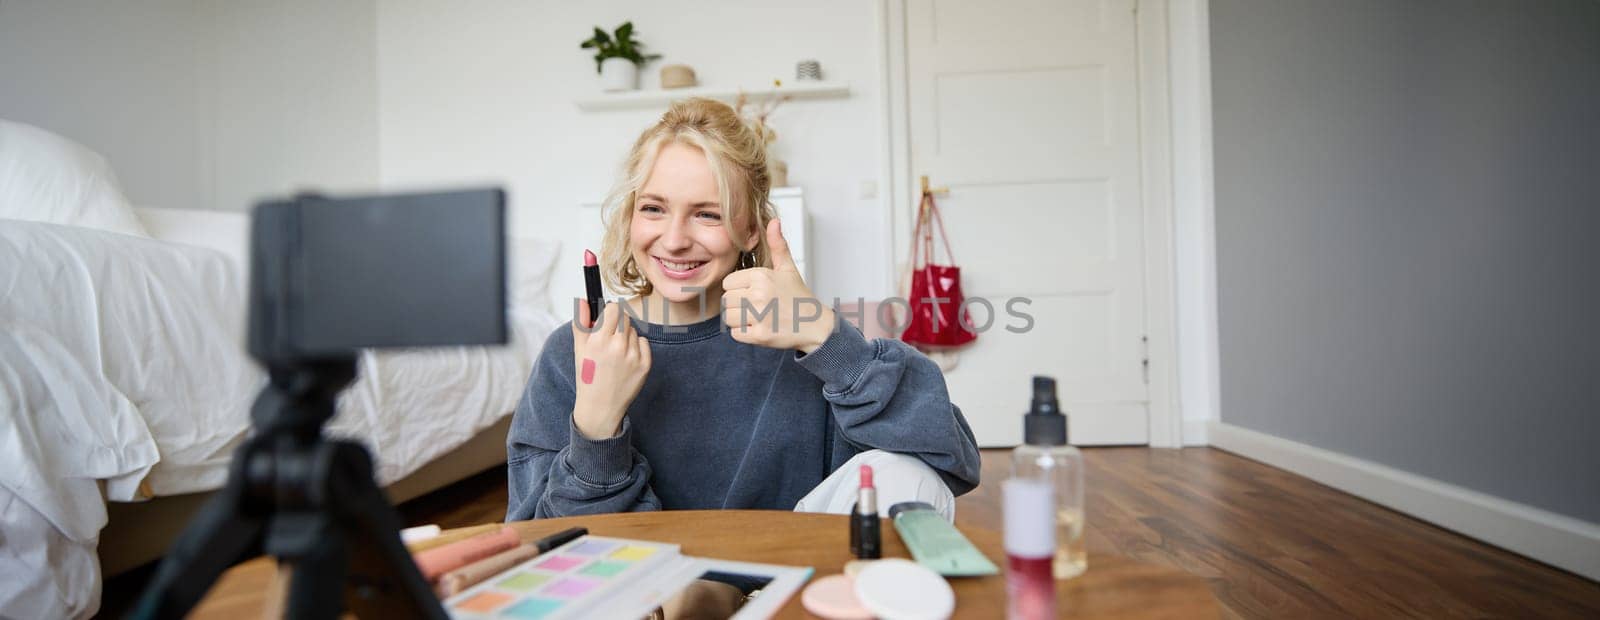 Happy young content creator, woman showing lipstick, recording lifestyle, beauty vlog on digital camera, makes thumbs up hand gesture, recommending makeup product.